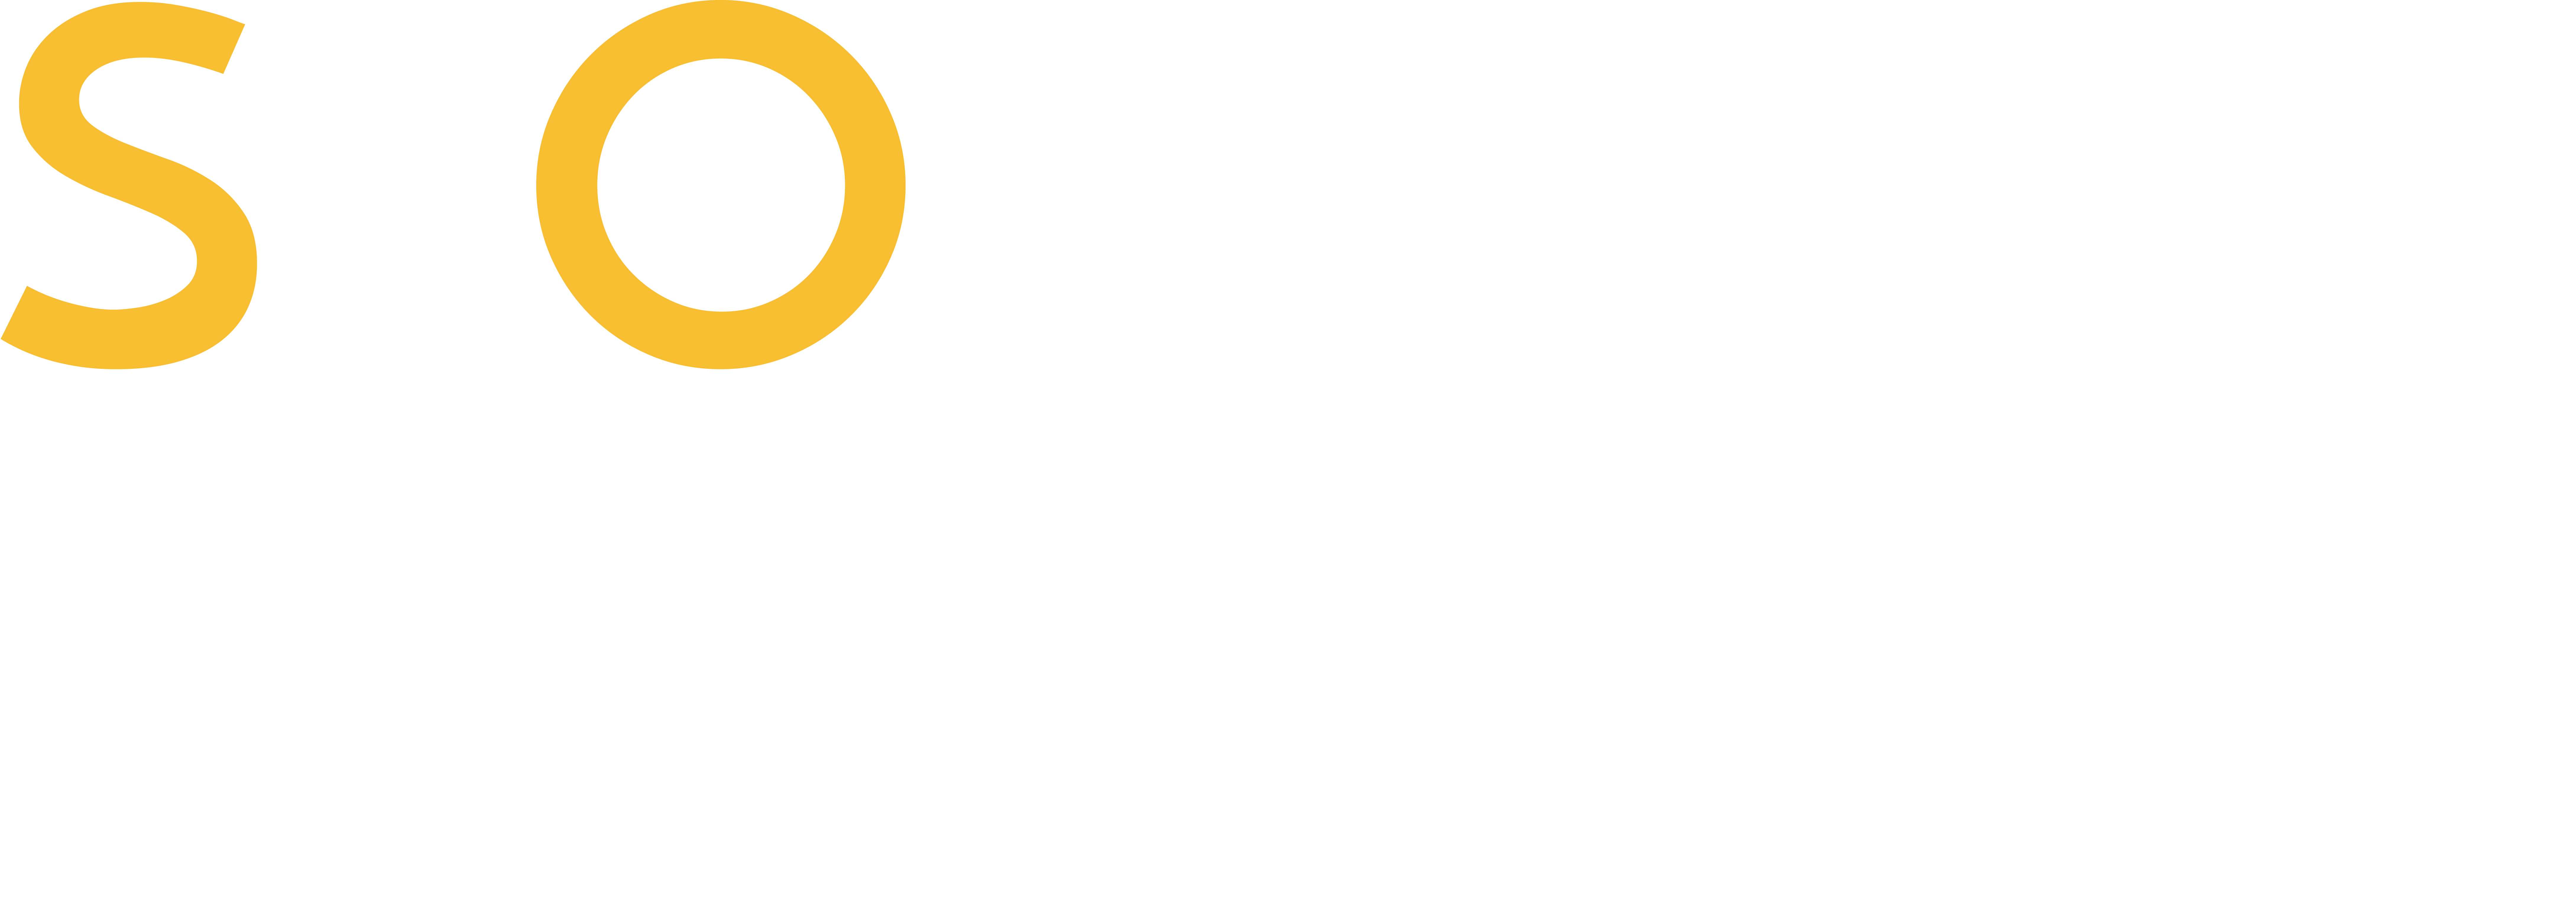 So You Homes logo in white upper case letters with yellow word 'So'